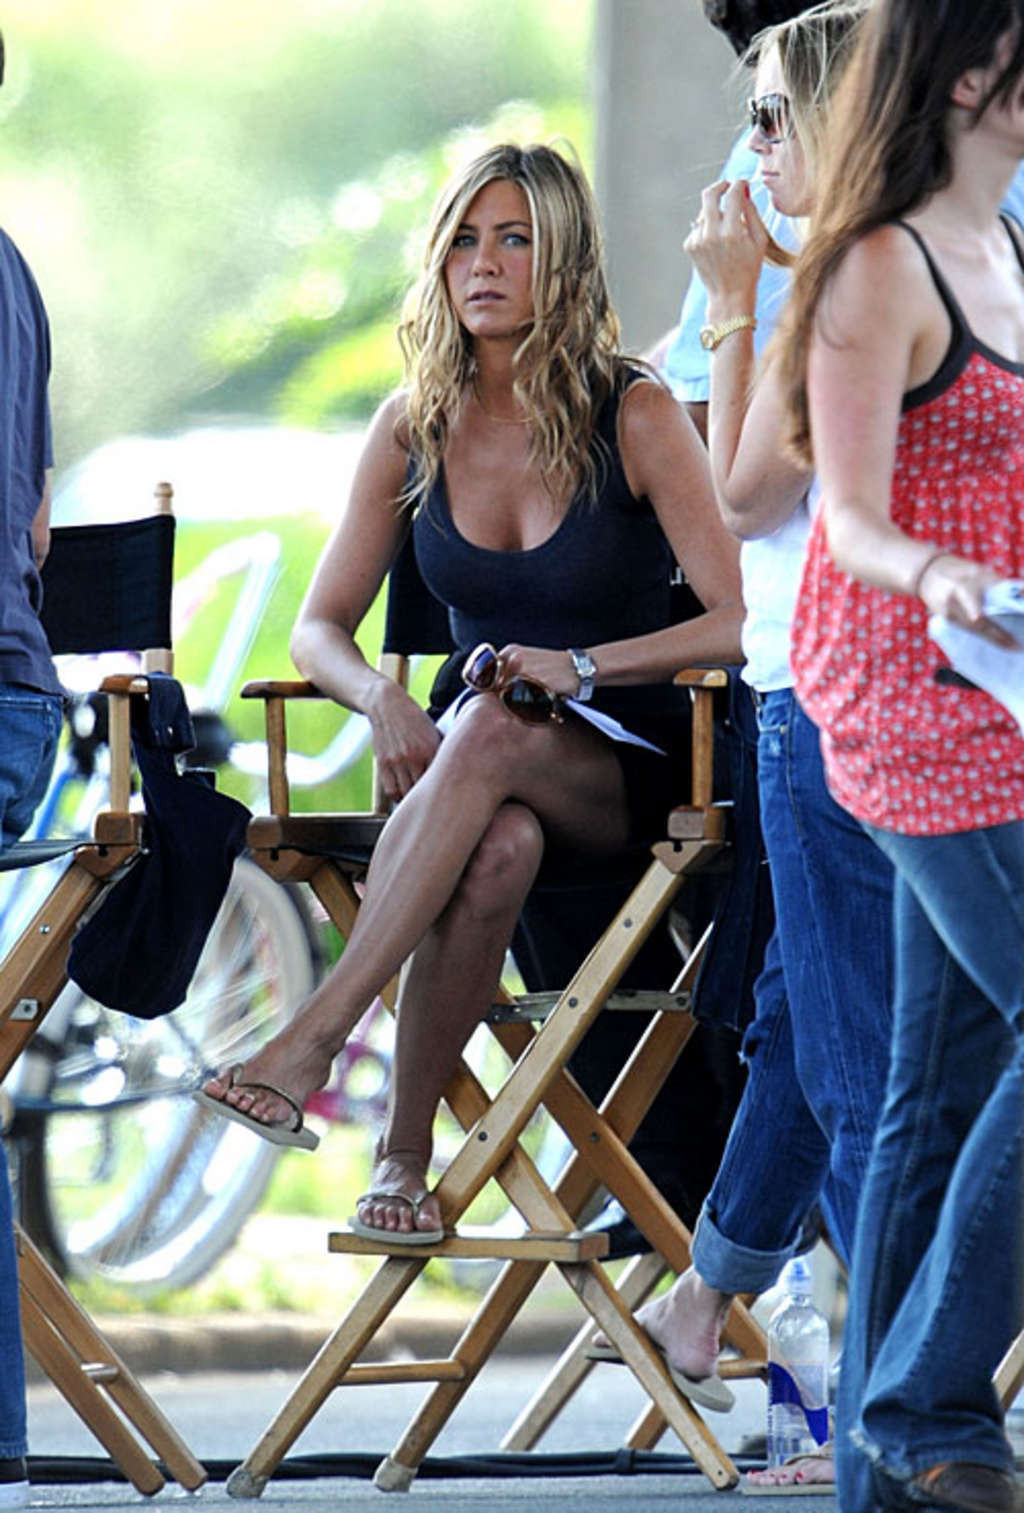 Jennifer Aniston nearly upskirt and exposing her immense knockers and nice legs